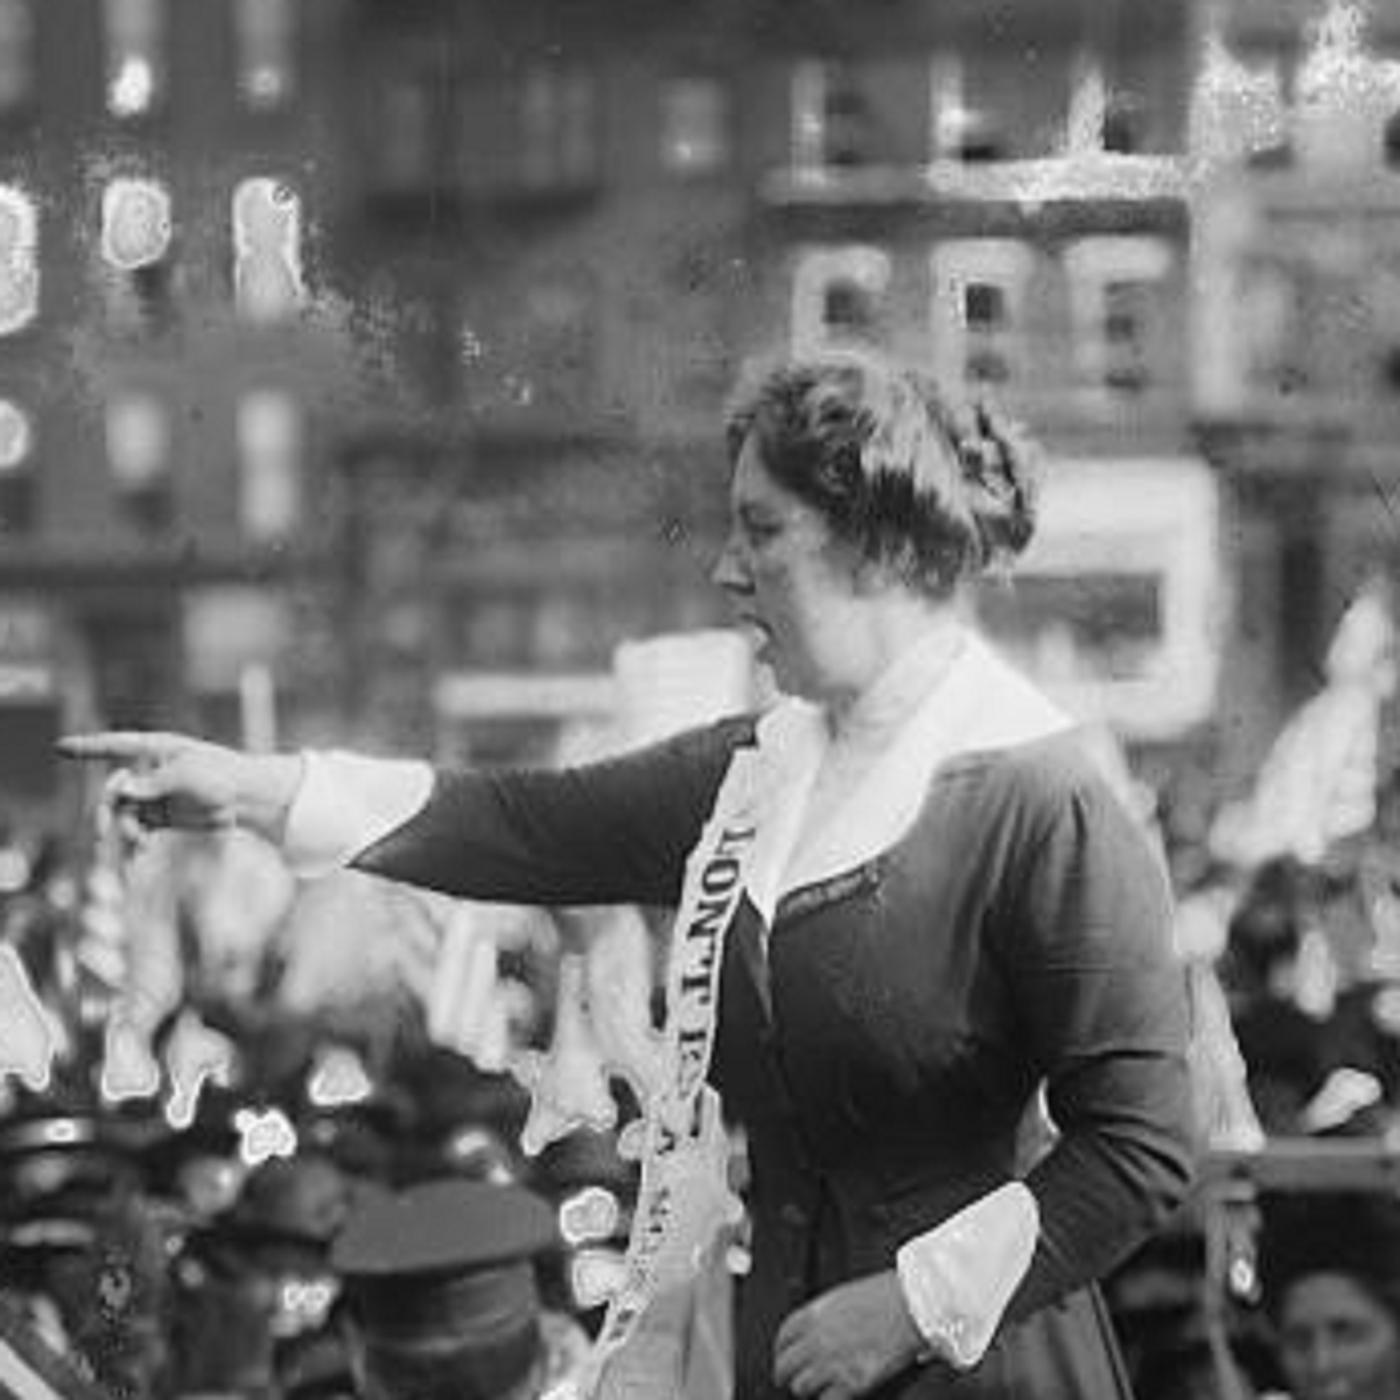 Labor leader and suffragist Margaret Hinchey speaks at a rally